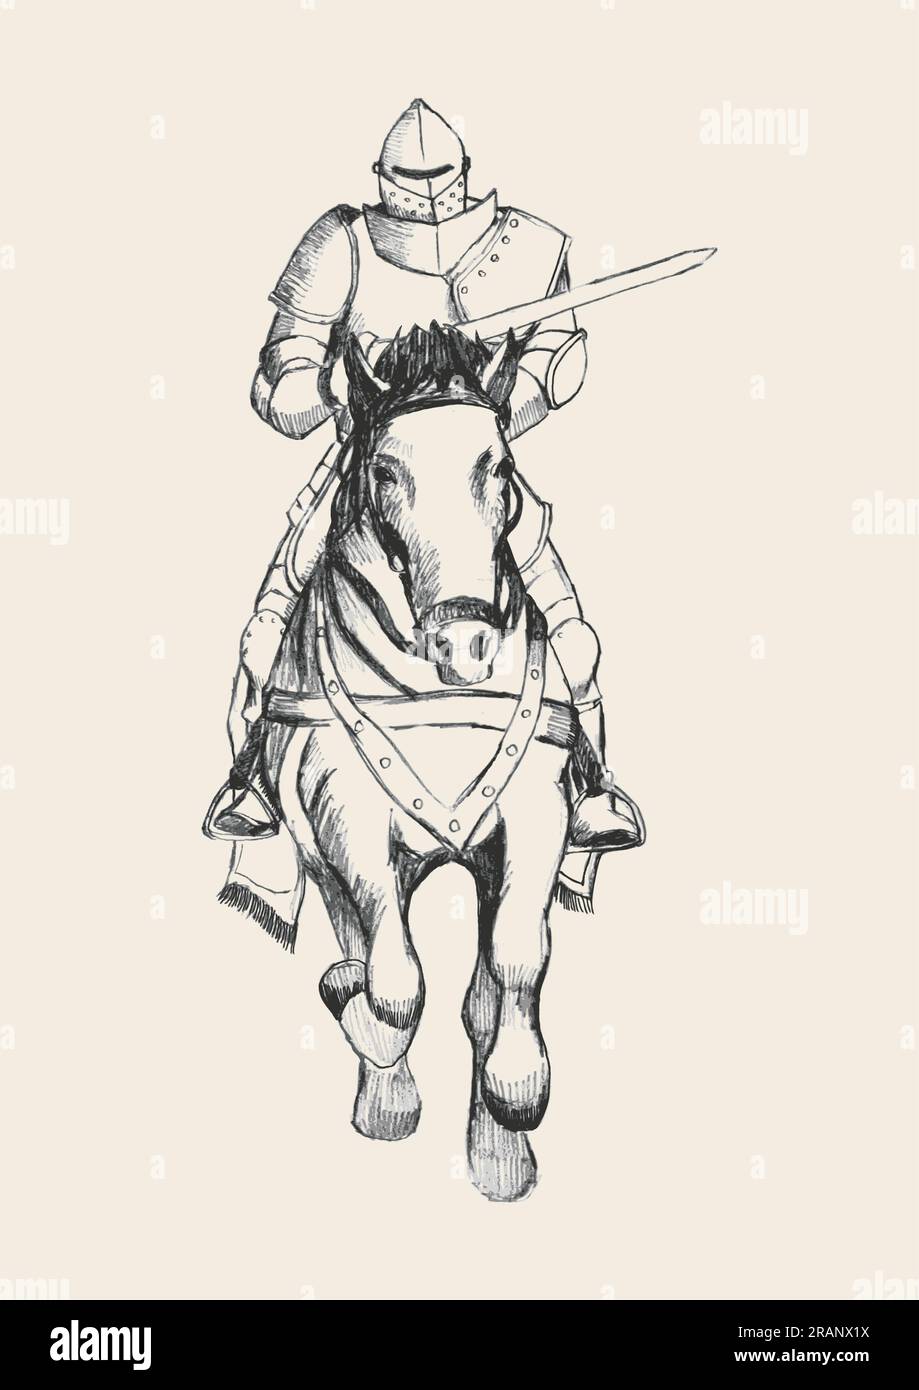 Sketch illustration of a medieval knight on horse carrying a lance Stock Vector